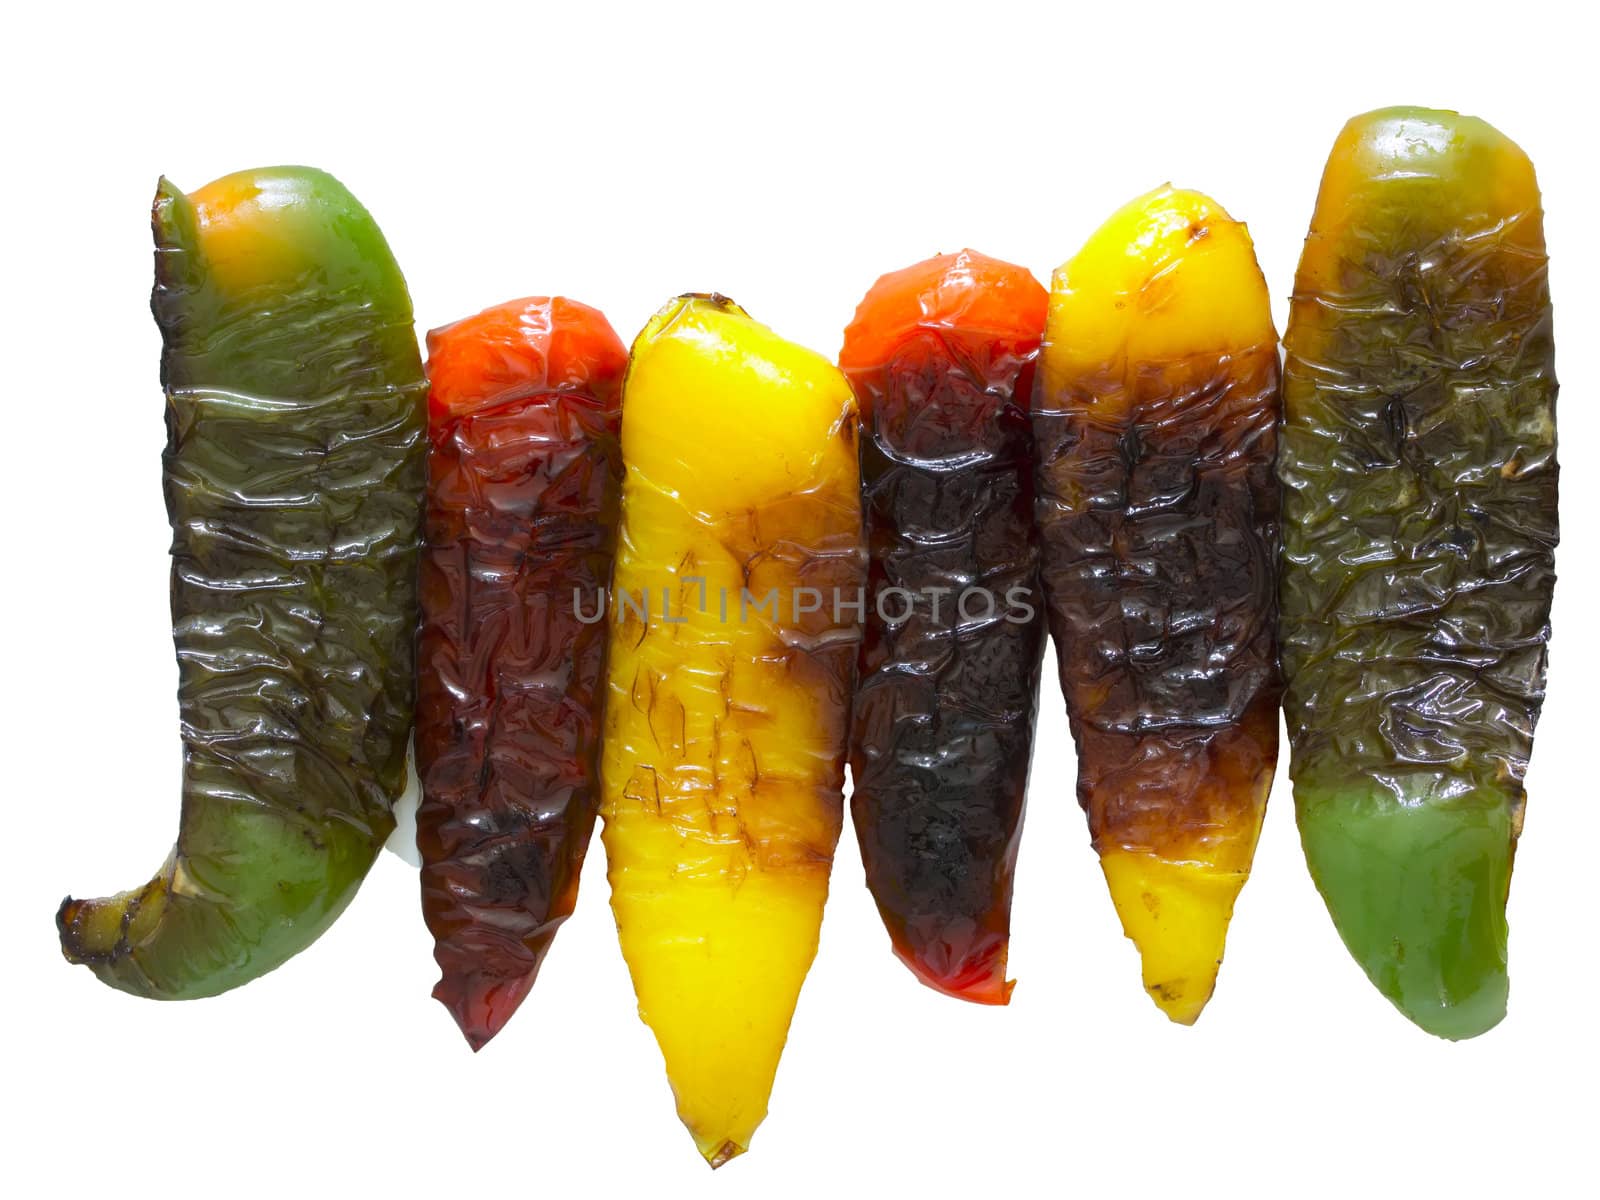 grilled bell peppers by zkruger